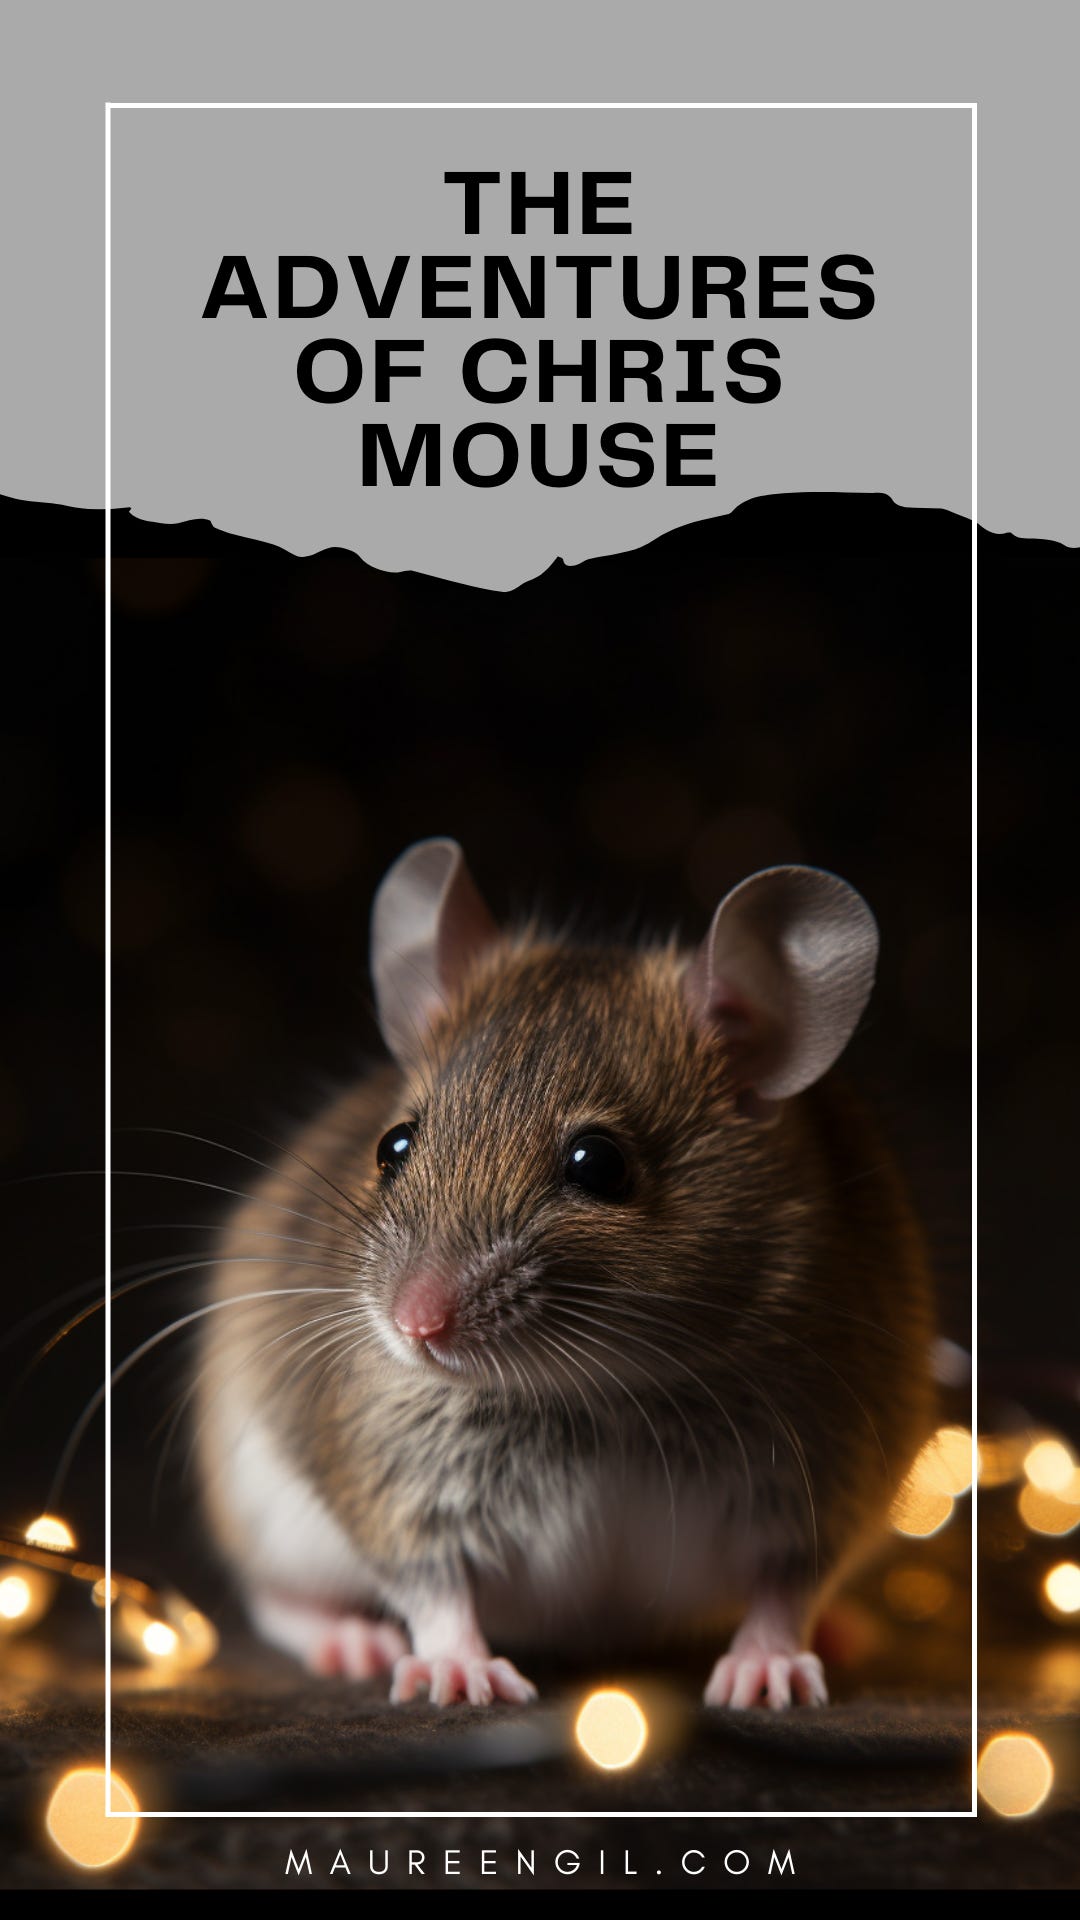 A little poem about a mouse on Christmas day.